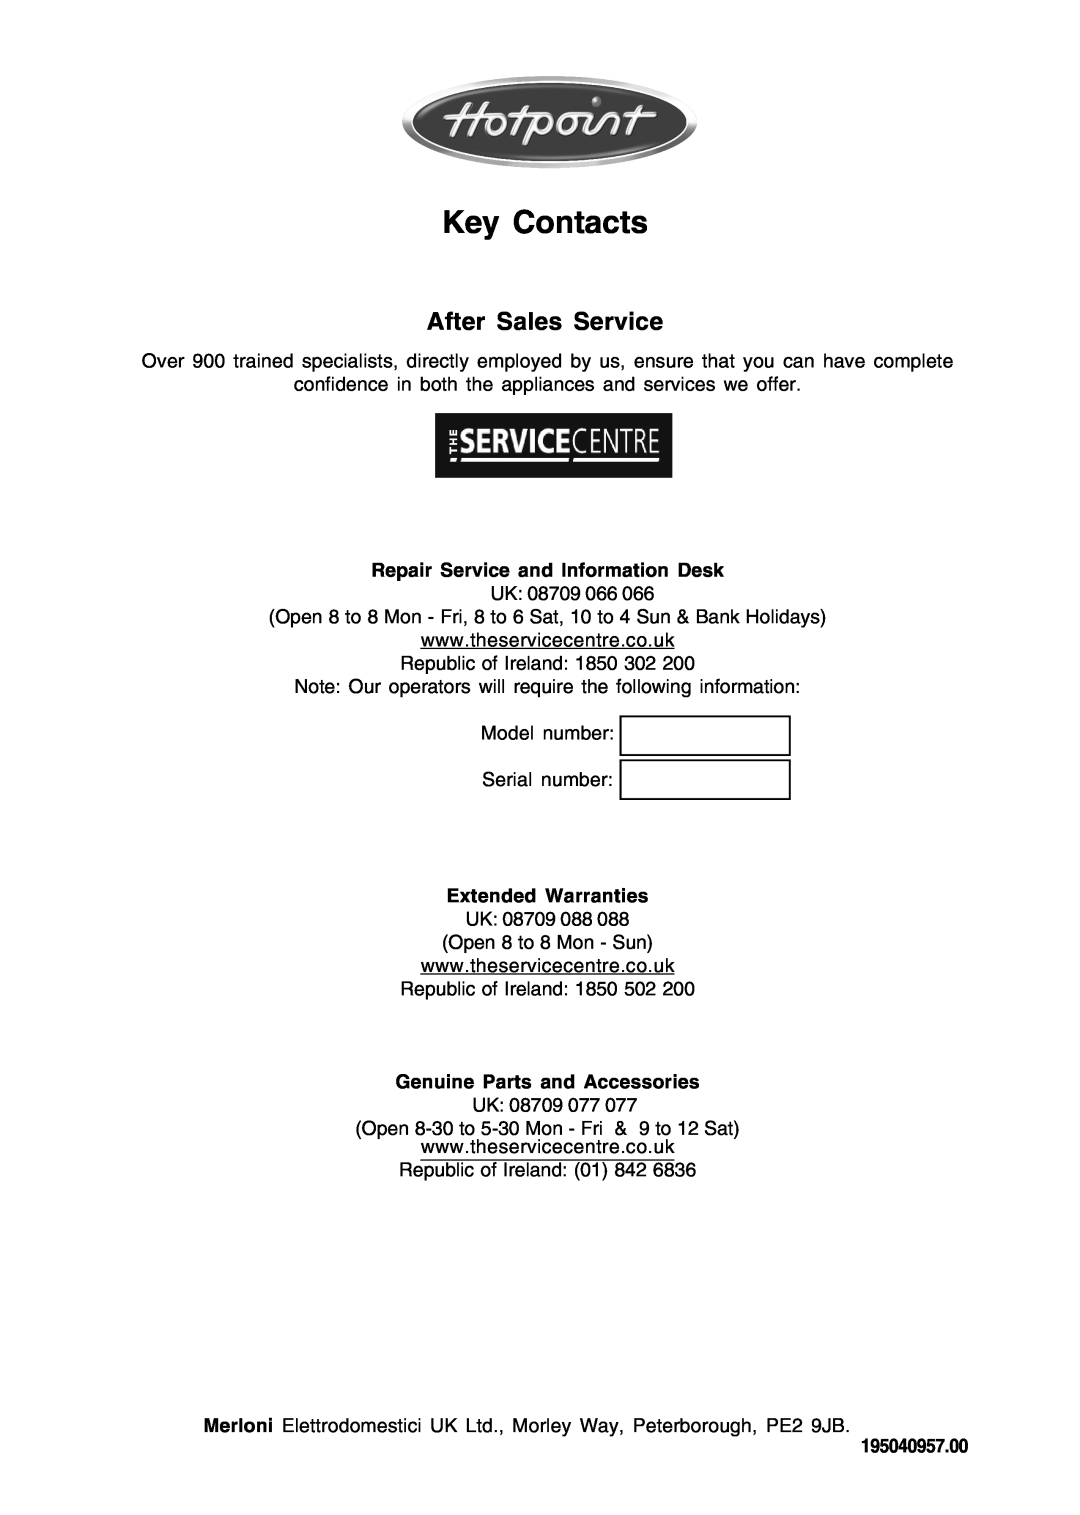 Hotpoint Instructions manual Key Contacts, After Sales Service, Repair Service and Information Desk, Extended Warranties 